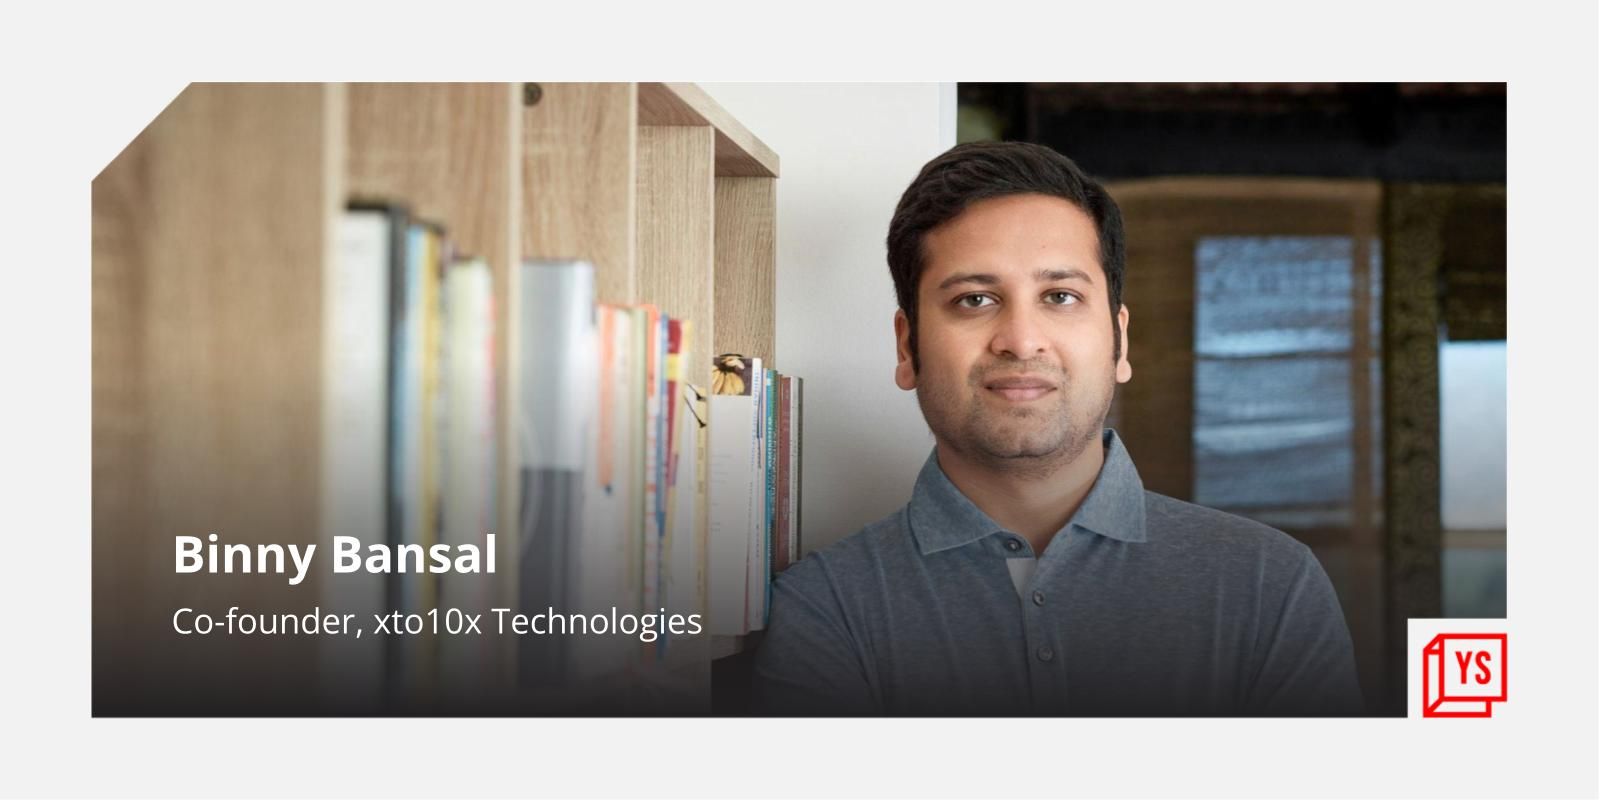 [Funding alert] xto10x Technologies secures $25M in Series A funding led by Binny Bansal
